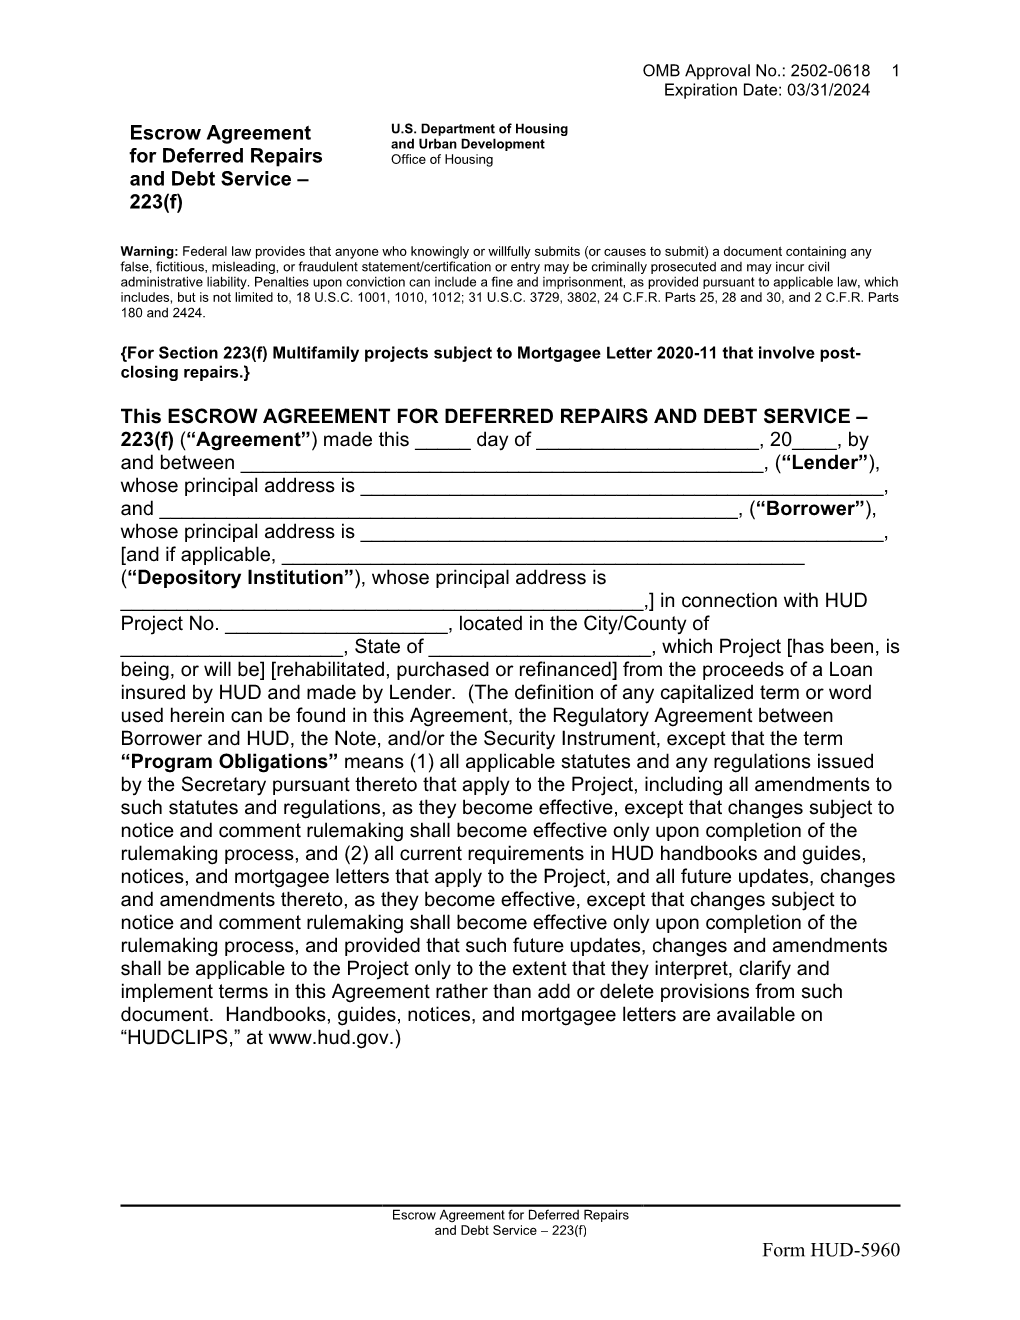 Form HUD-5960 Escrow Agreement for Deferred Repairs and Debt